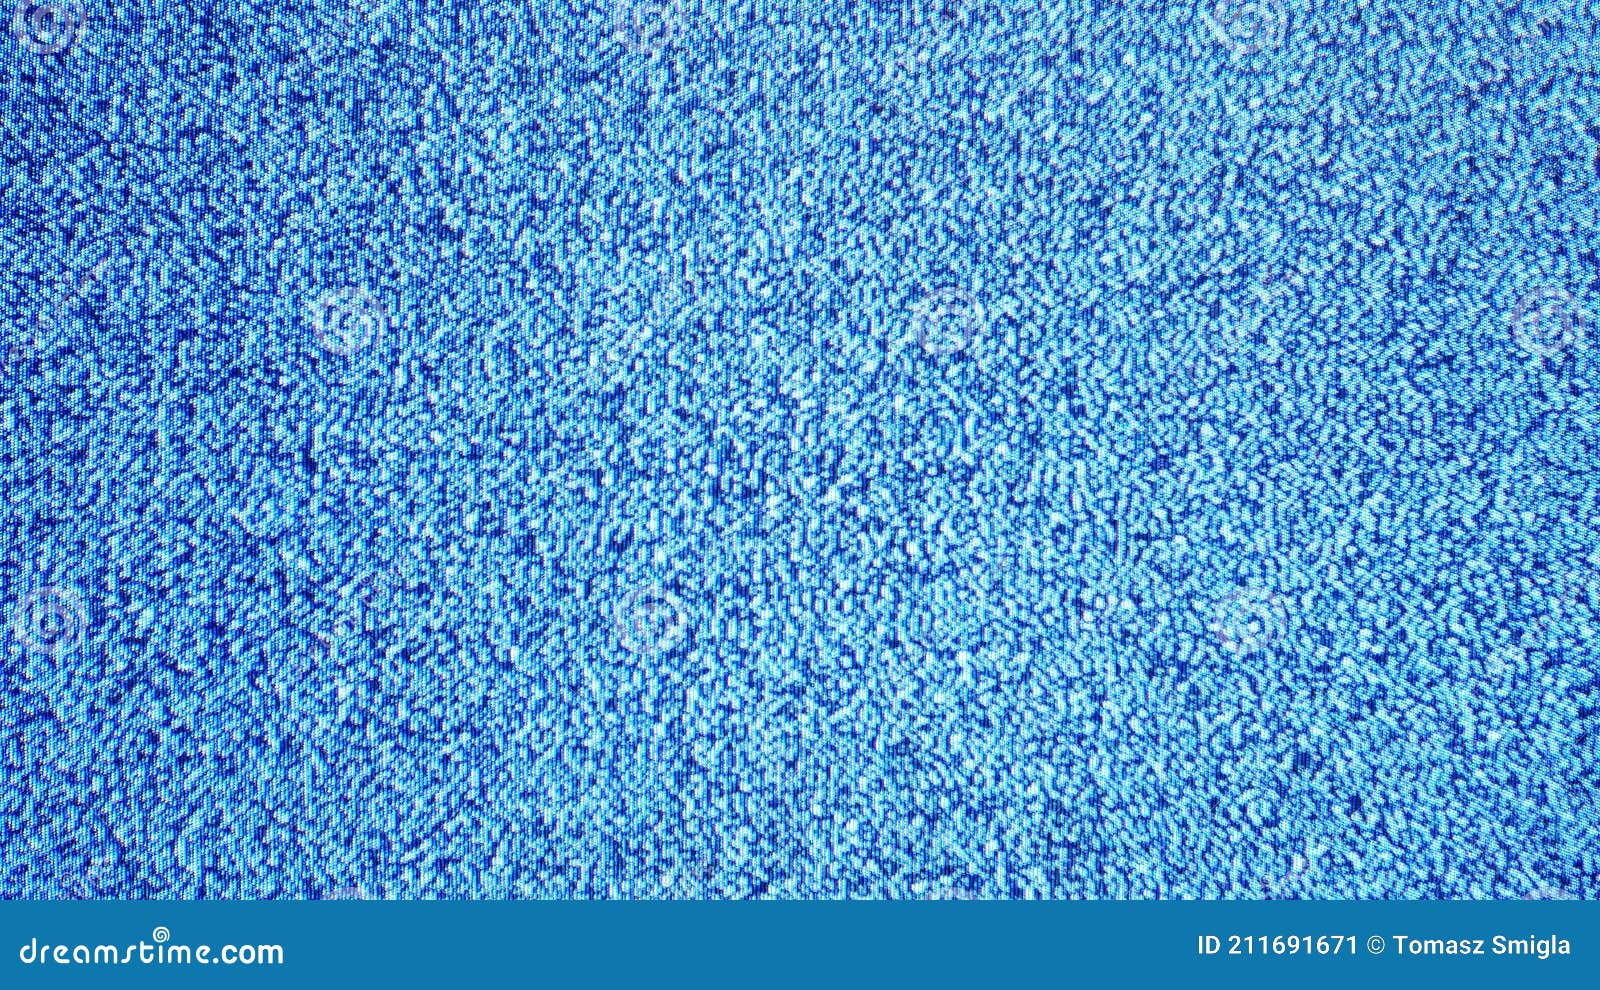 Old Retro CRT TV Screen Static Noise Abstract Background Texture Simple Crt Television Dark